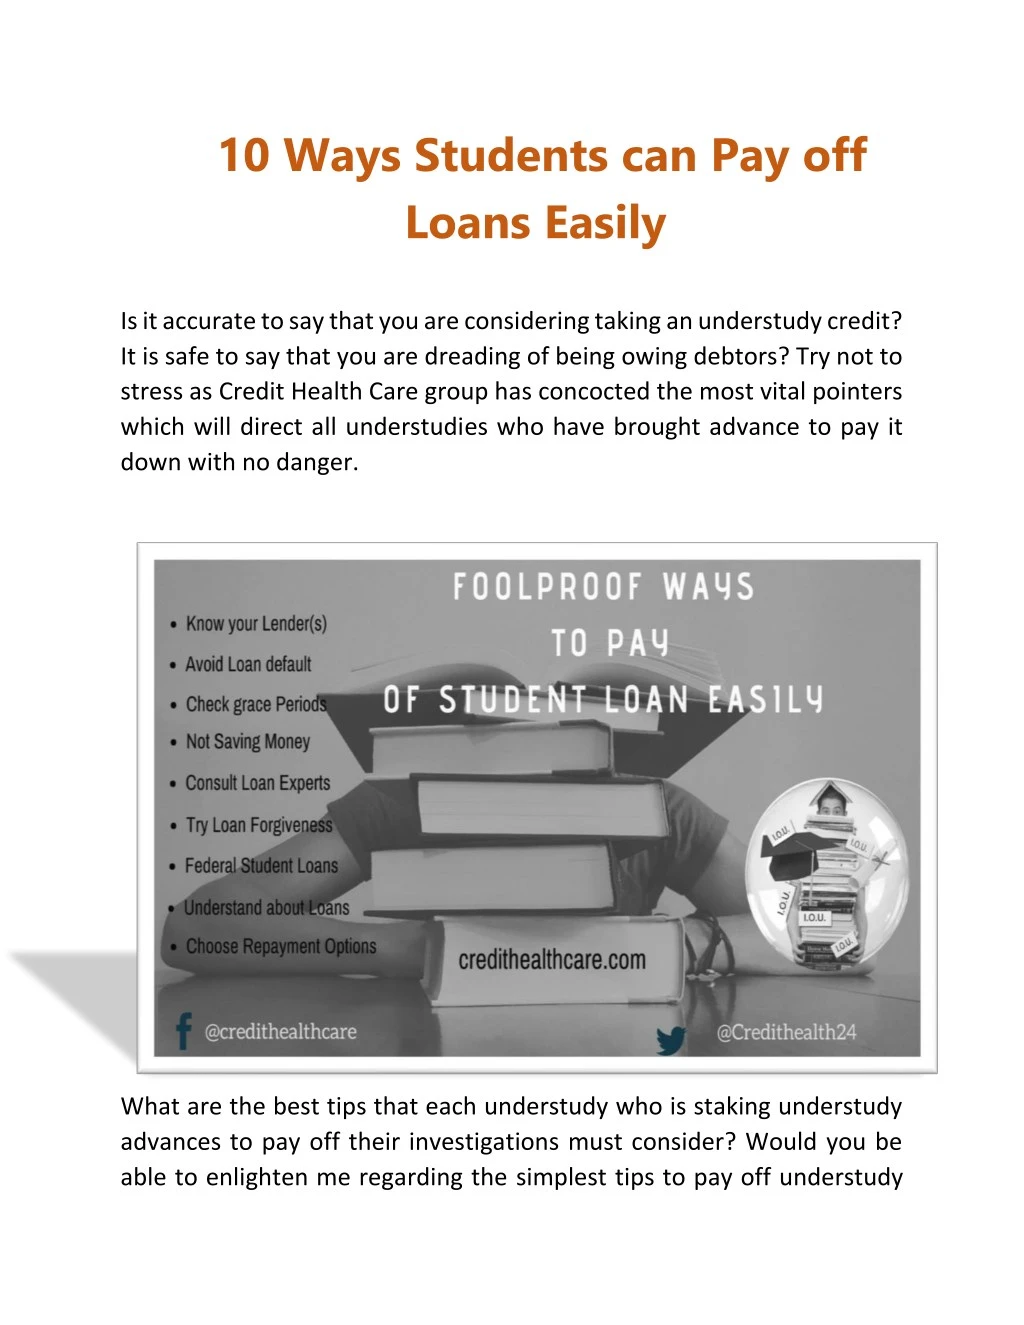 10 ways students can pay off loans easily